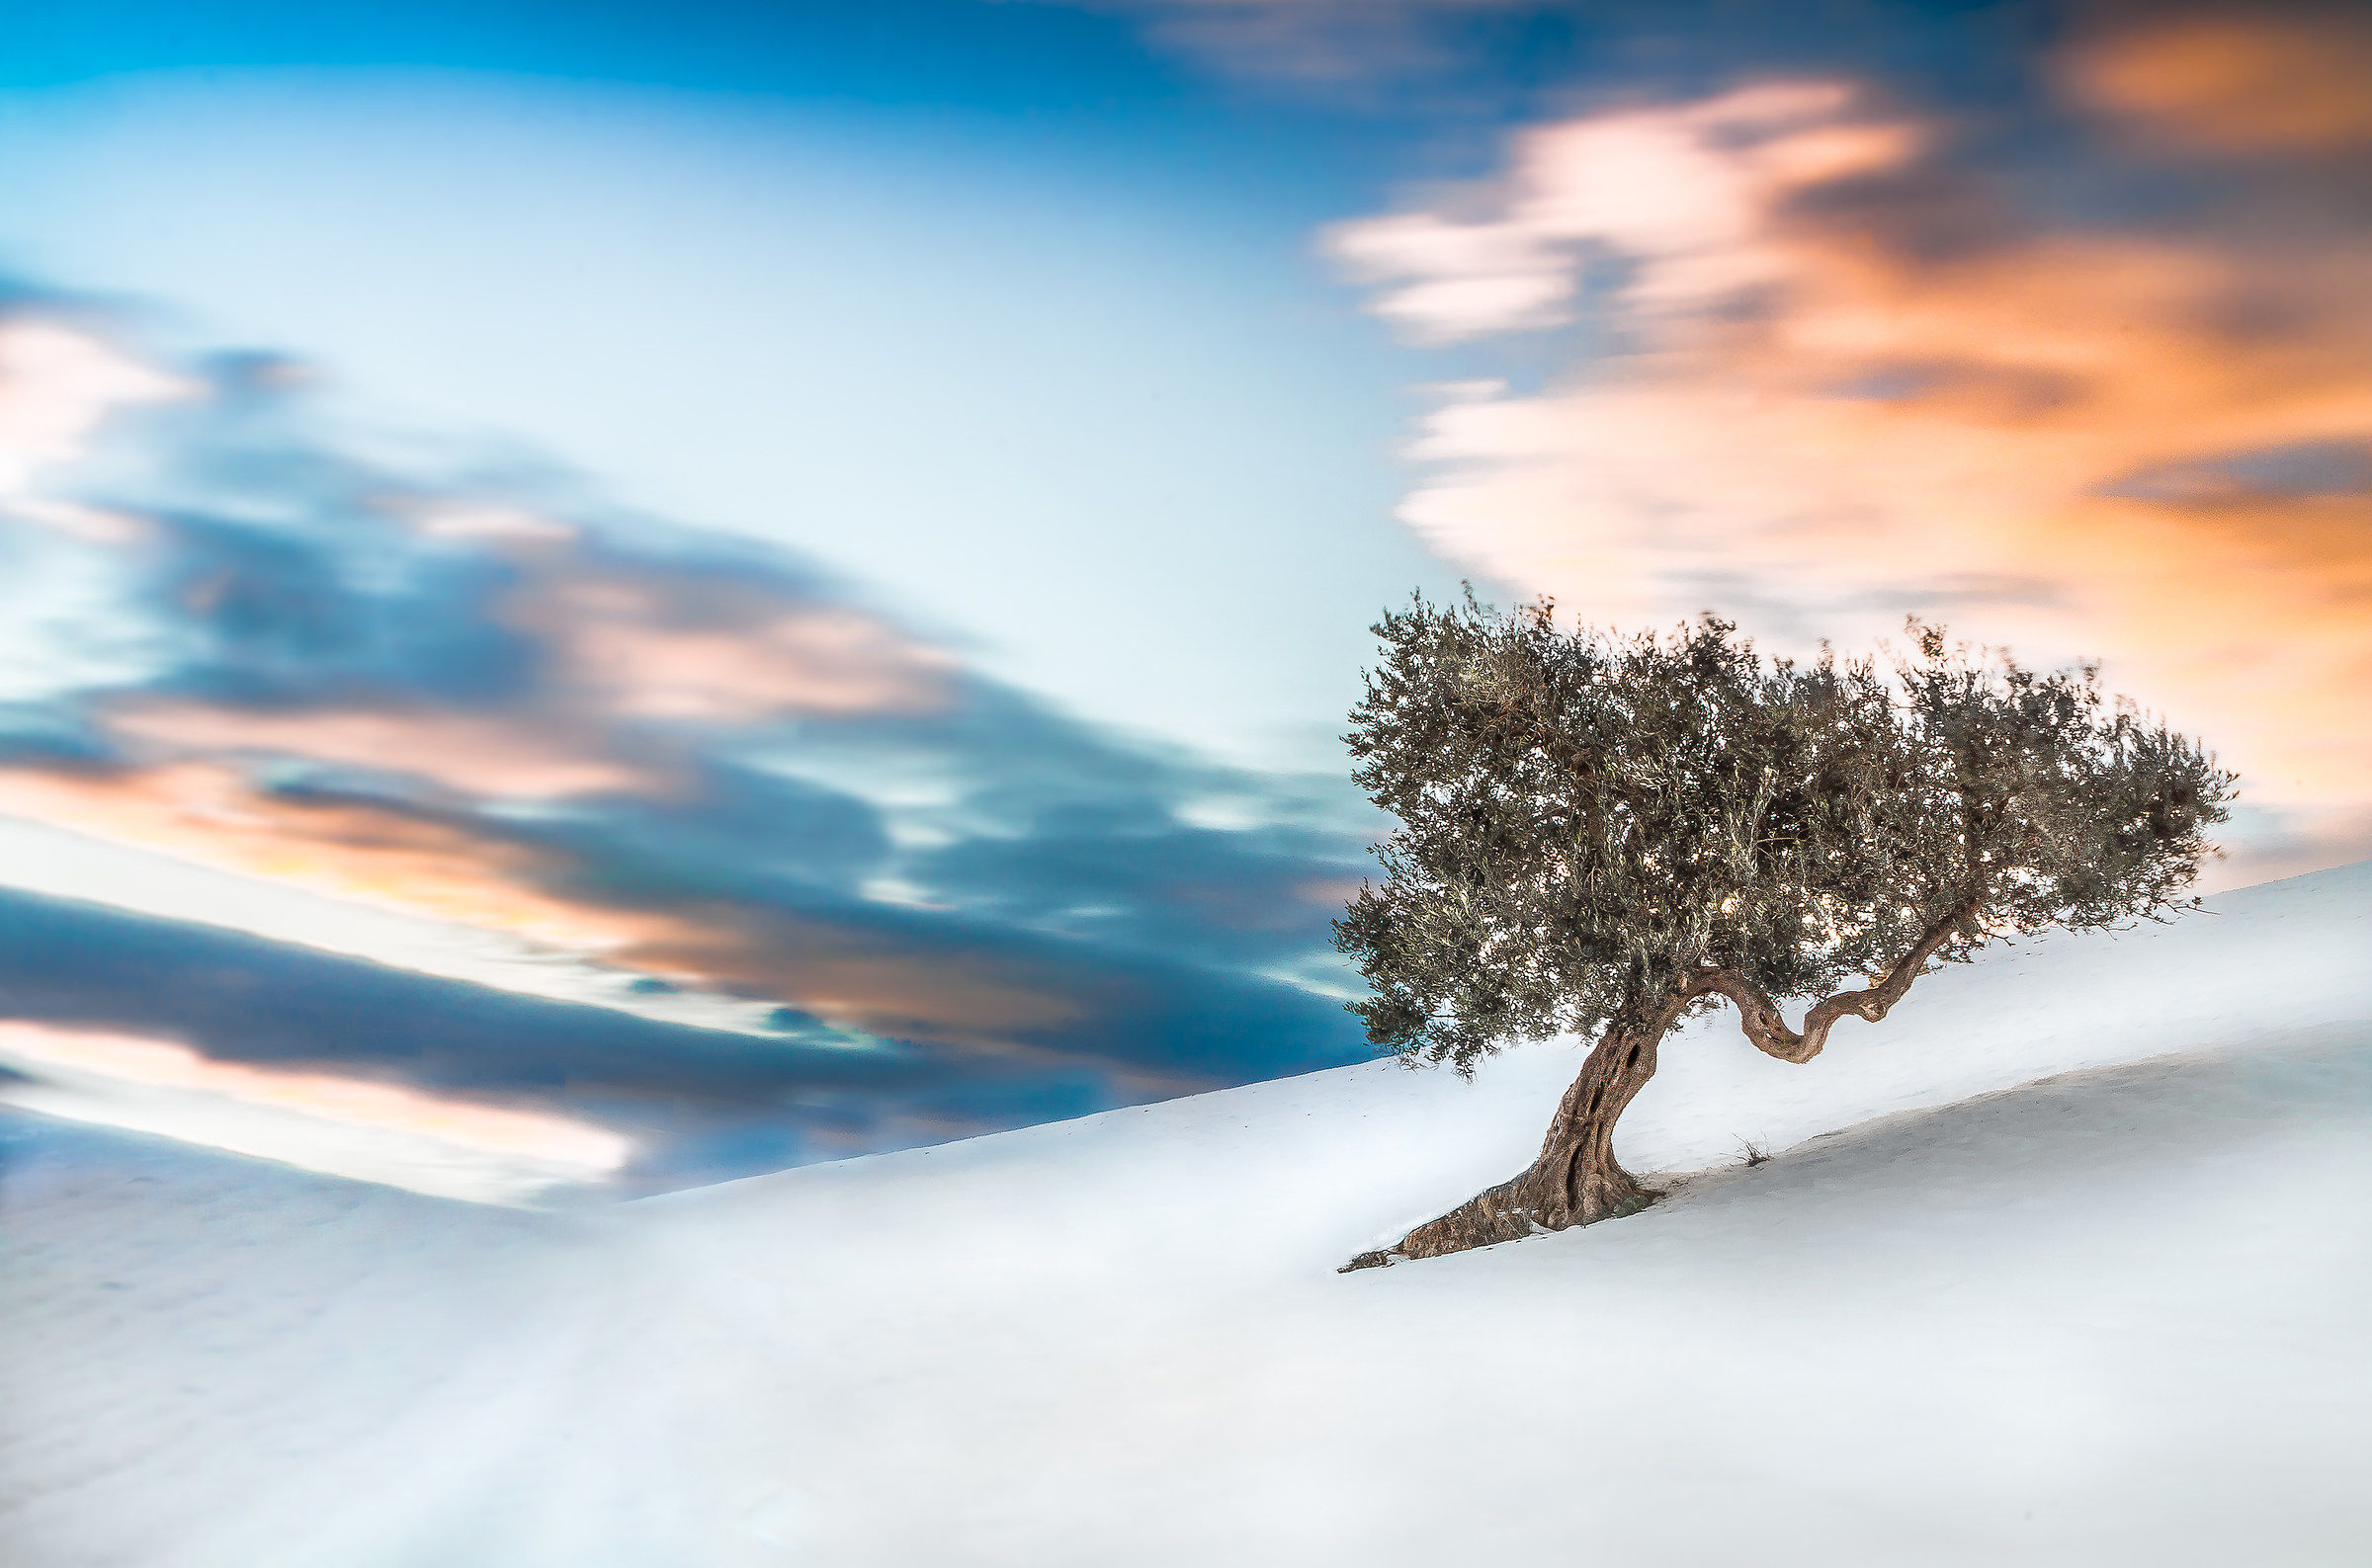 The Lonely Olive Tree...